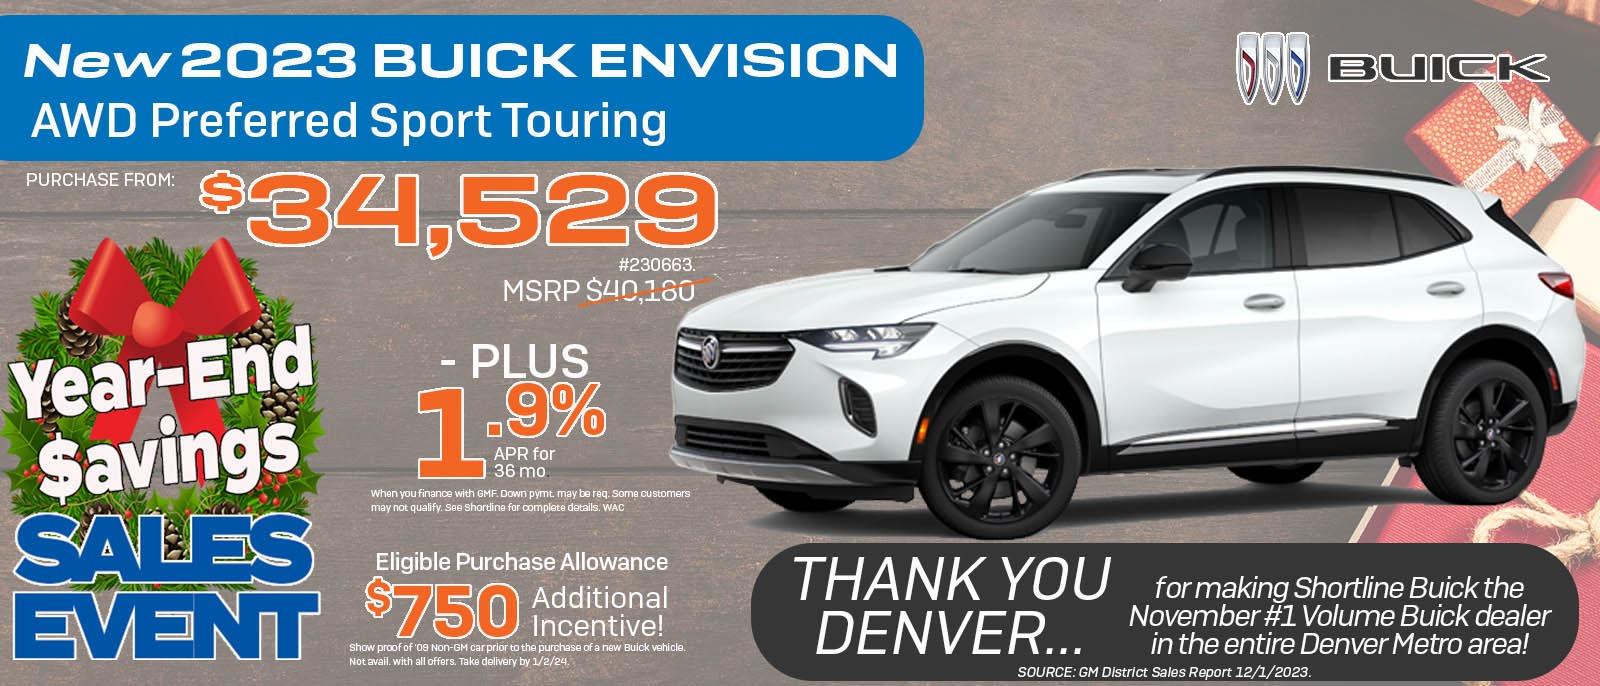 View Buick Envision Special in Denver at Shortline